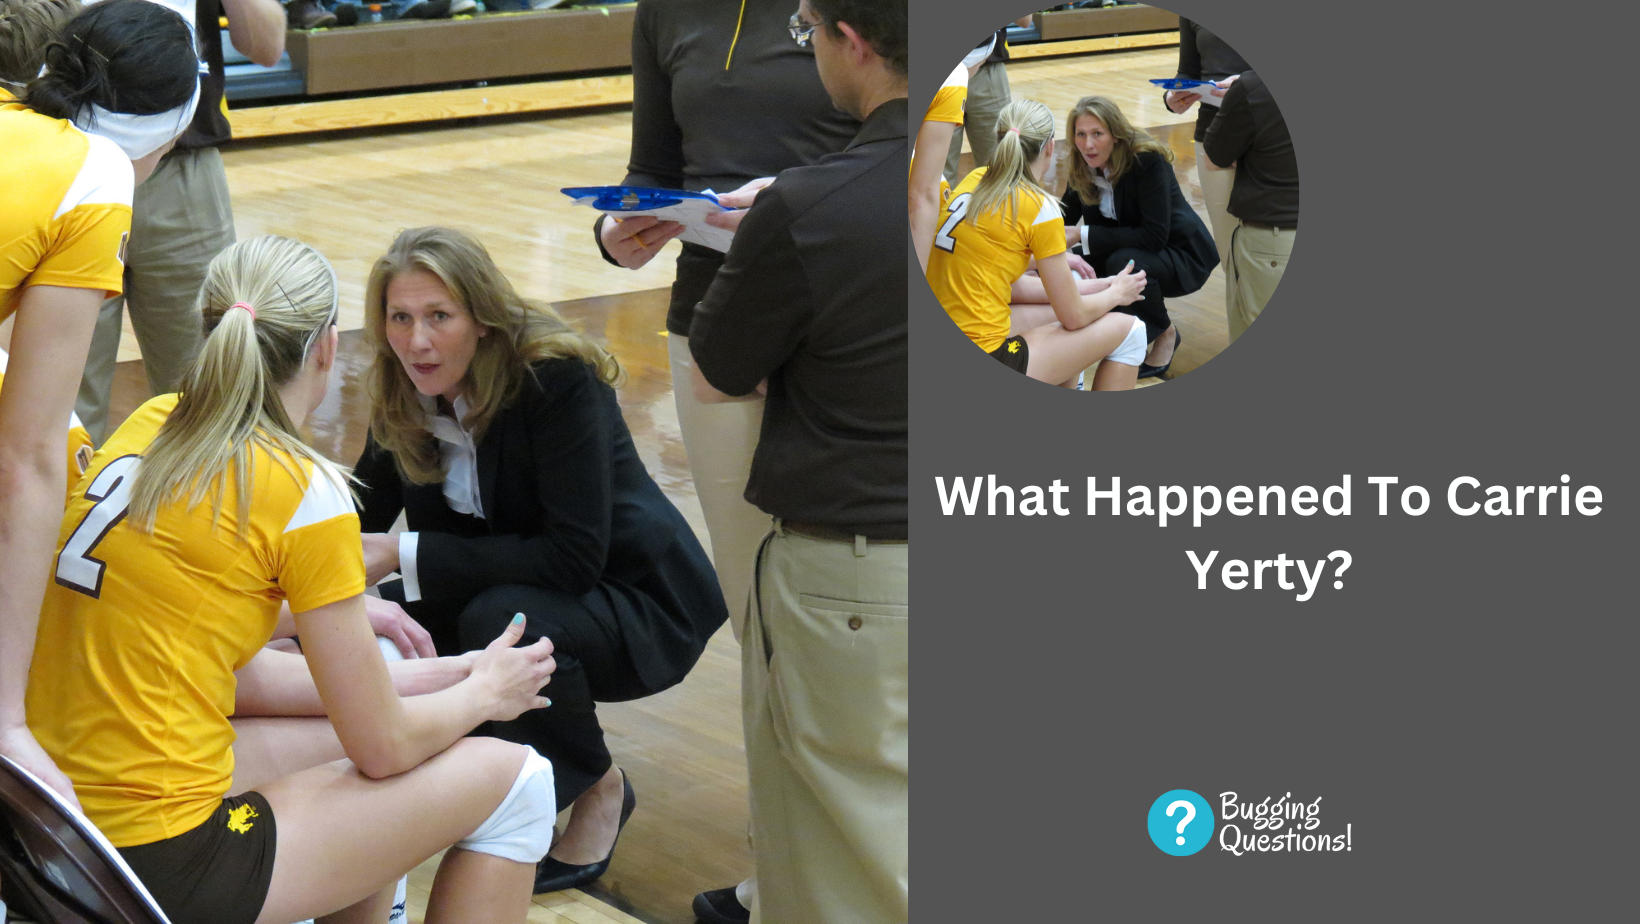 What Happened To Carrie Yerty?